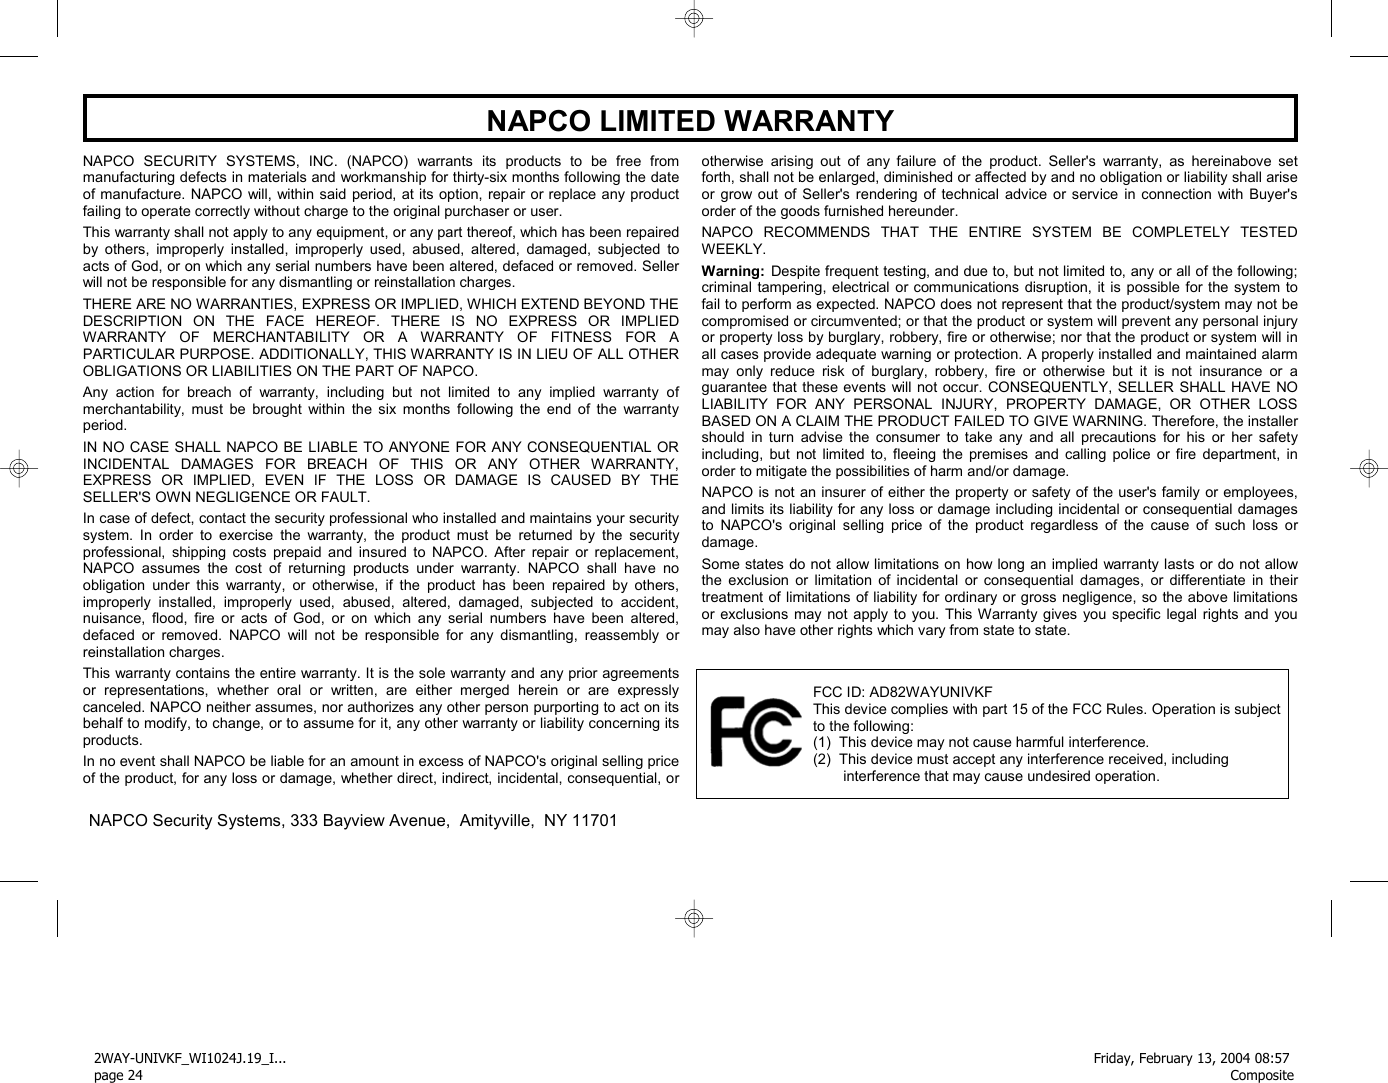 24 WI1024J  2WAY-UNIVKF Installation Instructions  NAPCO SECURITY SYSTEMS, INC. (NAPCO) warrants its products to be free from manufacturing defects in materials and workmanship for thirty-six months following the date of manufacture. NAPCO will, within said period, at its option, repair or replace any product failing to operate correctly without charge to the original purchaser or user.  This warranty shall not apply to any equipment, or any part thereof, which has been repaired by others, improperly installed, improperly used, abused, altered, damaged, subjected to acts of God, or on which any serial numbers have been altered, defaced or removed. Seller will not be responsible for any dismantling or reinstallation charges.  THERE ARE NO WARRANTIES, EXPRESS OR IMPLIED, WHICH EXTEND BEYOND THE DESCRIPTION ON THE FACE HEREOF. THERE IS NO EXPRESS OR IMPLIED WARRANTY OF MERCHANTABILITY OR A WARRANTY OF FITNESS FOR A PARTICULAR PURPOSE. ADDITIONALLY, THIS WARRANTY IS IN LIEU OF ALL OTHER OBLIGATIONS OR LIABILITIES ON THE PART OF NAPCO.  Any action for breach of warranty, including but not limited to any implied warranty of merchantability, must be brought within the six months following the end of the warranty period.   IN NO CASE SHALL NAPCO BE LIABLE TO ANYONE FOR ANY CONSEQUENTIAL OR INCIDENTAL DAMAGES FOR BREACH OF THIS OR ANY OTHER WARRANTY, EXPRESS OR IMPLIED, EVEN IF THE LOSS OR DAMAGE IS CAUSED BY THE SELLER&apos;S OWN NEGLIGENCE OR FAULT.  In case of defect, contact the security professional who installed and maintains your security system. In order to exercise the warranty, the product must be returned by the security professional, shipping costs prepaid and insured to NAPCO. After repair or replacement, NAPCO assumes the cost of returning products under warranty. NAPCO shall have no obligation under this warranty, or otherwise, if the product has been repaired by others, improperly installed, improperly used, abused, altered, damaged, subjected to accident, nuisance, flood, fire or acts of God, or on which any serial numbers have been altered, defaced or removed. NAPCO will not be responsible for any dismantling, reassembly or reinstallation charges.  This warranty contains the entire warranty. It is the sole warranty and any prior agreements or representations, whether oral or written, are either merged herein or are expressly canceled. NAPCO neither assumes, nor authorizes any other person purporting to act on its behalf to modify, to change, or to assume for it, any other warranty or liability concerning its products.  In no event shall NAPCO be liable for an amount in excess of NAPCO&apos;s original selling price of the product, for any loss or damage, whether direct, indirect, incidental, consequential, or otherwise arising out of any failure of the product. Seller&apos;s warranty, as hereinabove set forth, shall not be enlarged, diminished or affected by and no obligation or liability shall arise or grow out of Seller&apos;s rendering of technical advice or service in connection with Buyer&apos;s order of the goods furnished hereunder.  NAPCO RECOMMENDS THAT THE ENTIRE SYSTEM BE COMPLETELY TESTED WEEKLY.  Warning:  Despite frequent testing, and due to, but not limited to, any or all of the following; criminal tampering, electrical or communications disruption, it is possible for the system to fail to perform as expected. NAPCO does not represent that the product/system may not be compromised or circumvented; or that the product or system will prevent any personal injury or property loss by burglary, robbery, fire or otherwise; nor that the product or system will in all cases provide adequate warning or protection. A properly installed and maintained alarm may only reduce risk of burglary, robbery, fire or otherwise but it is not insurance or a guarantee that these events will not occur. CONSEQUENTLY, SELLER SHALL HAVE NO LIABILITY FOR ANY PERSONAL INJURY, PROPERTY DAMAGE, OR OTHER LOSS BASED ON A CLAIM THE PRODUCT FAILED TO GIVE WARNING. Therefore, the installer should in turn advise the consumer to take any and all precautions for his or her safety including, but not limited to, fleeing the premises and calling police or fire department, in order to mitigate the possibilities of harm and/or damage.   NAPCO is not an insurer of either the property or safety of the user&apos;s family or employees, and limits its liability for any loss or damage including incidental or consequential damages to NAPCO&apos;s original selling price of the product regardless of the cause of such loss or damage.  Some states do not allow limitations on how long an implied warranty lasts or do not allow the exclusion or limitation of incidental or consequential damages, or differentiate in their treatment of limitations of liability for ordinary or gross negligence, so the above limitations or exclusions may not apply to you. This Warranty gives you specific legal rights and you may also have other rights which vary from state to state.        NAPCO LIMITED WARRANTY                 NAPCO Security Systems, 333 Bayview Avenue,  Amityville,  NY 11701                                                                                                                  FCC ID: AD82WAYUNIVKF This device complies with part 15 of the FCC Rules. Operation is subject to the following: (1)  This device may not cause harmful interference.  (2)  This device must accept any interference received, including interference that may cause undesired operation. 2WAY-UNIVKF_WI1024J.19_I... page 24Friday, February 13, 2004 08:57 Composite